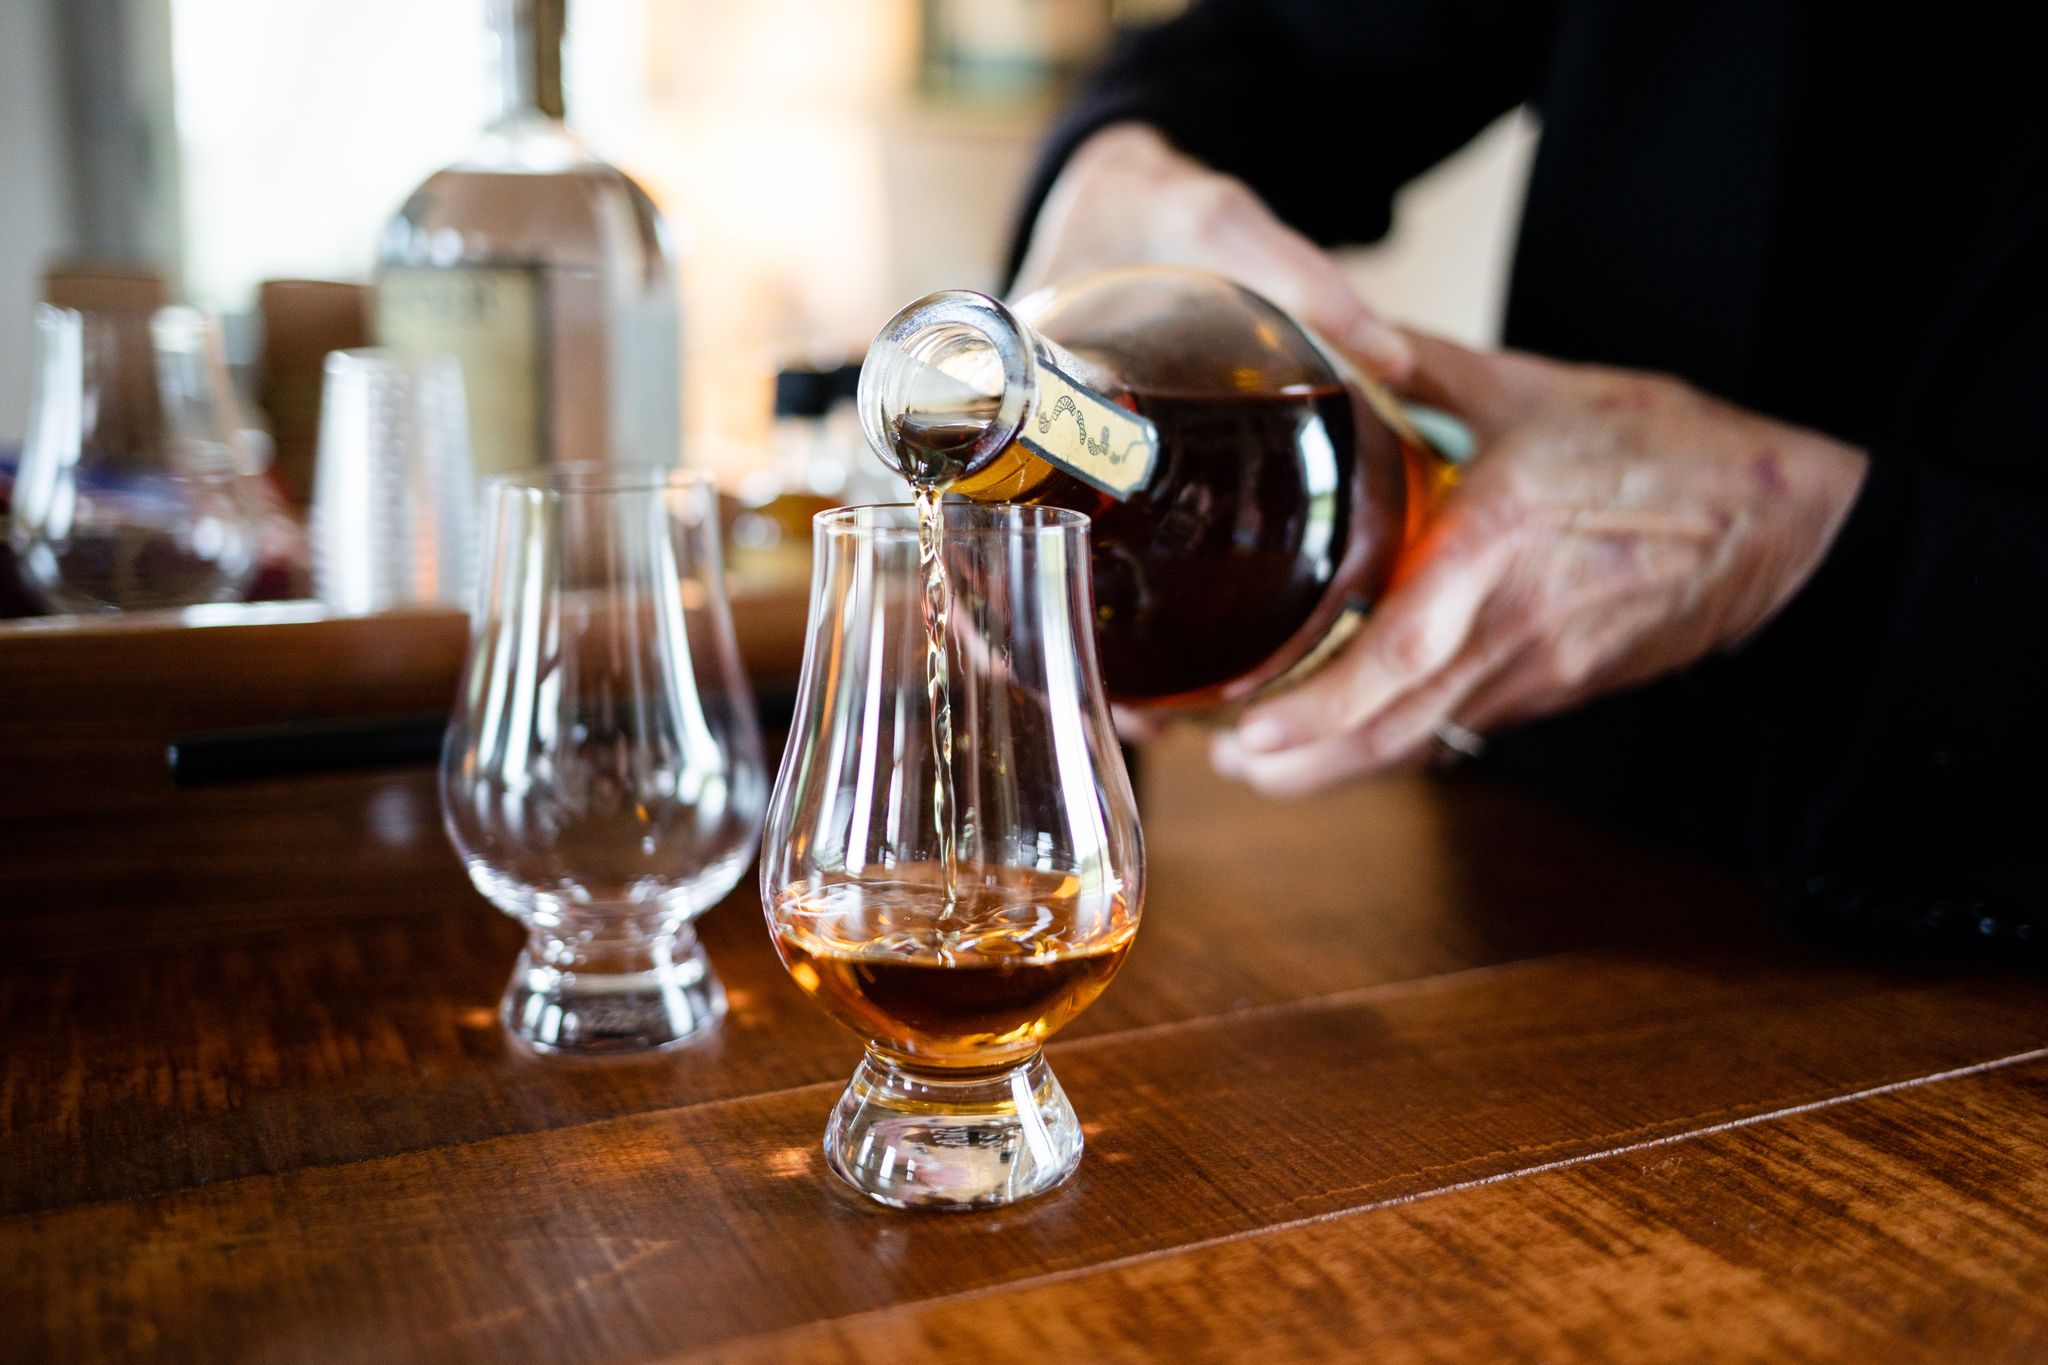 A woman pours Cooper's Cut whiskey into a tasting glass at Founding Fathers Distillery.